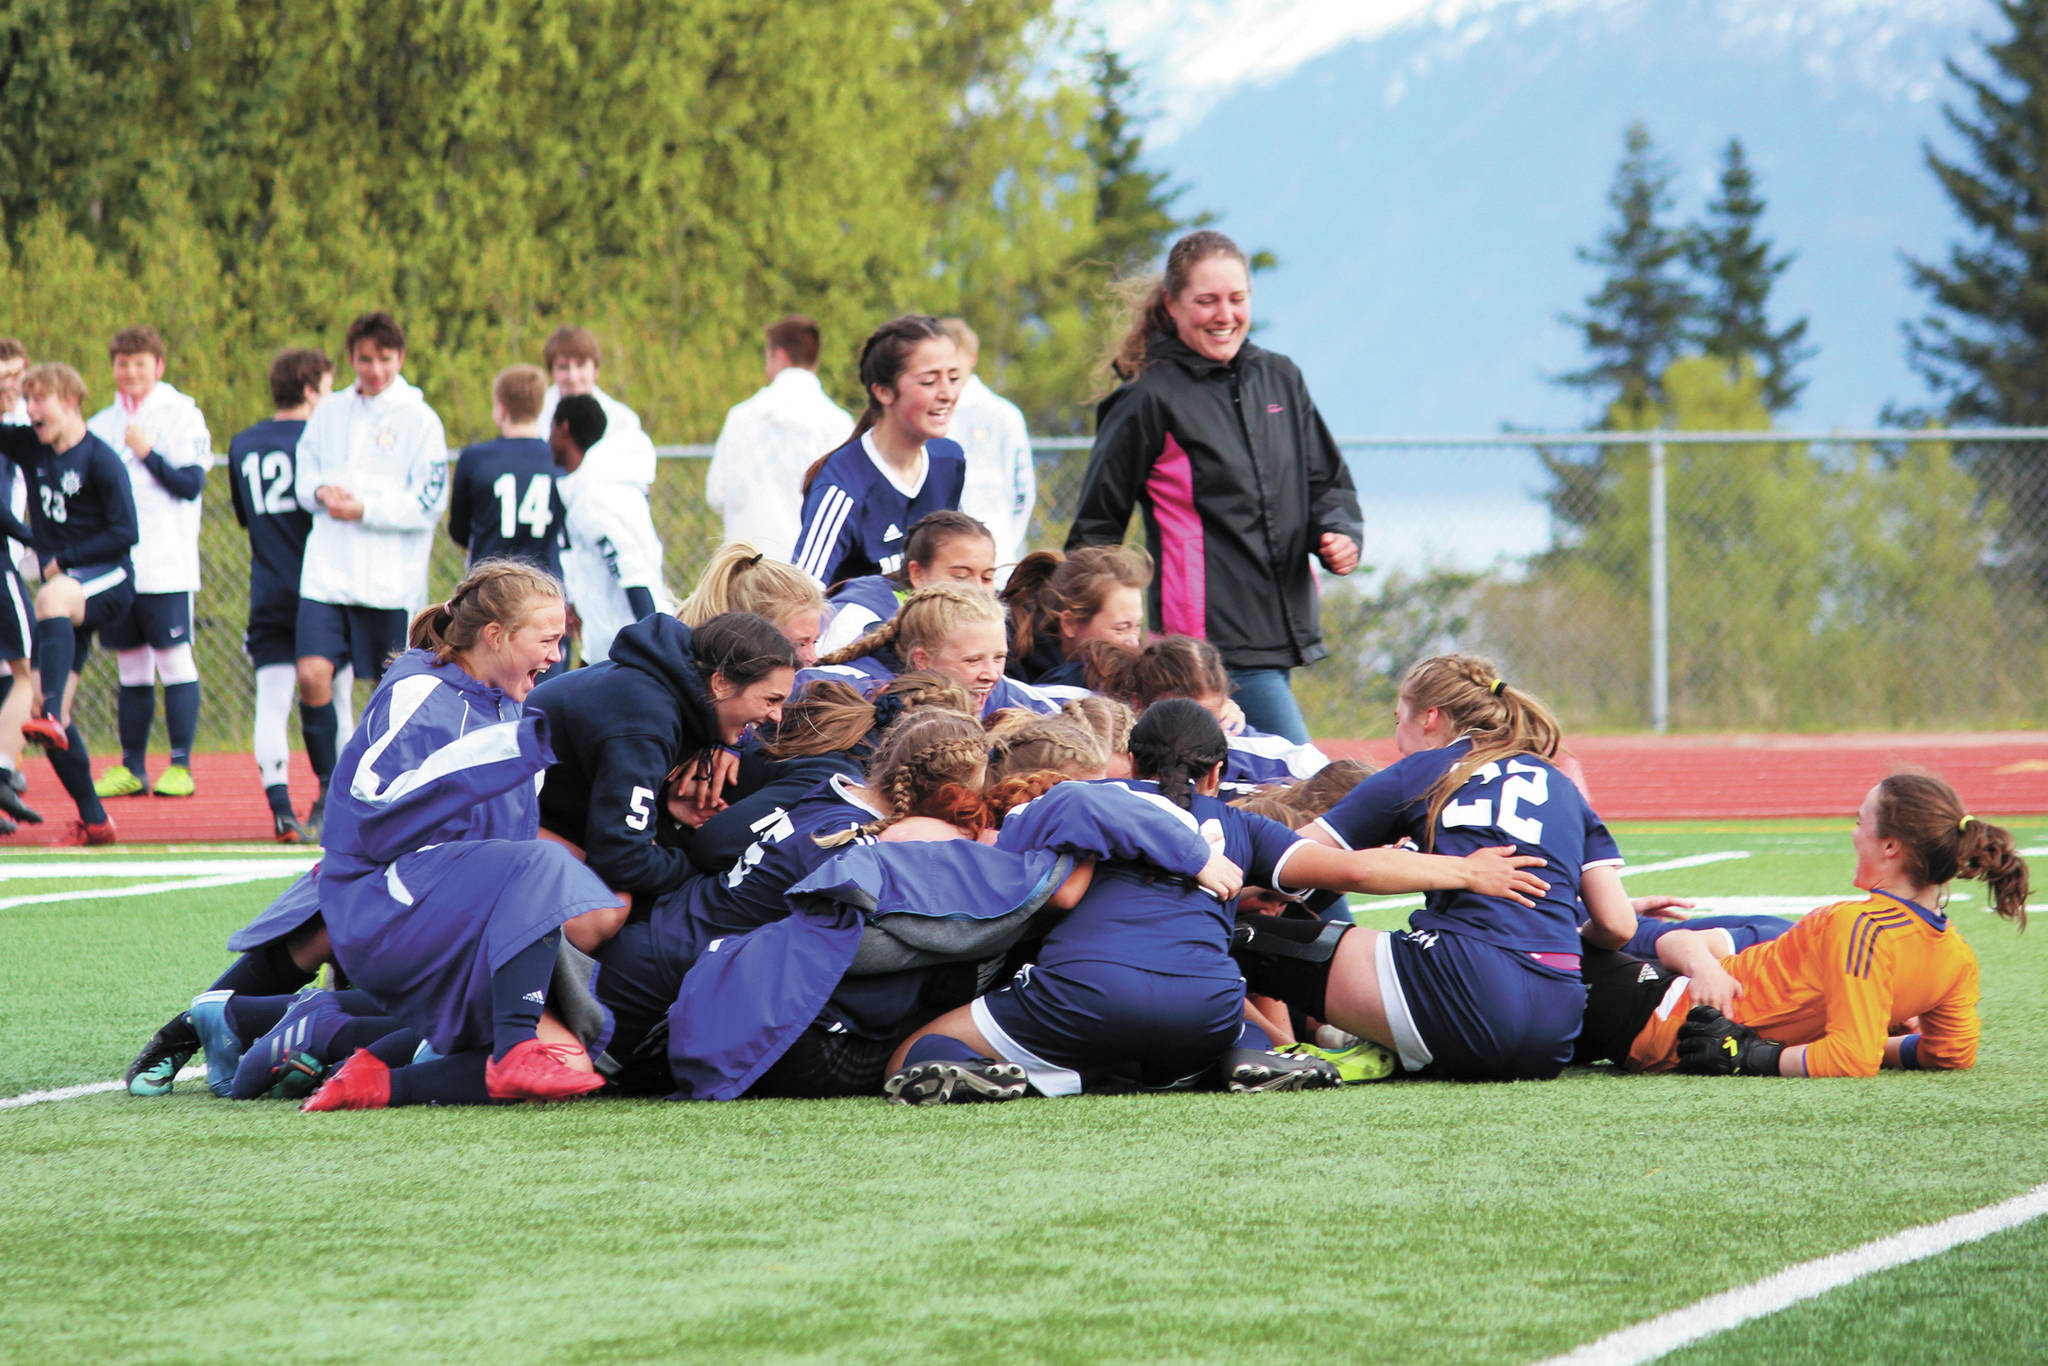 The Homer girls soccer team celebrates its 4-3 win over Kenai Central High School in the semi-final match of the Peninsula Conference Soccer Tournament on May 17, 2019 at Homer High School in Homer, Alaska. (Photo by Megan Pacer/Homer News)